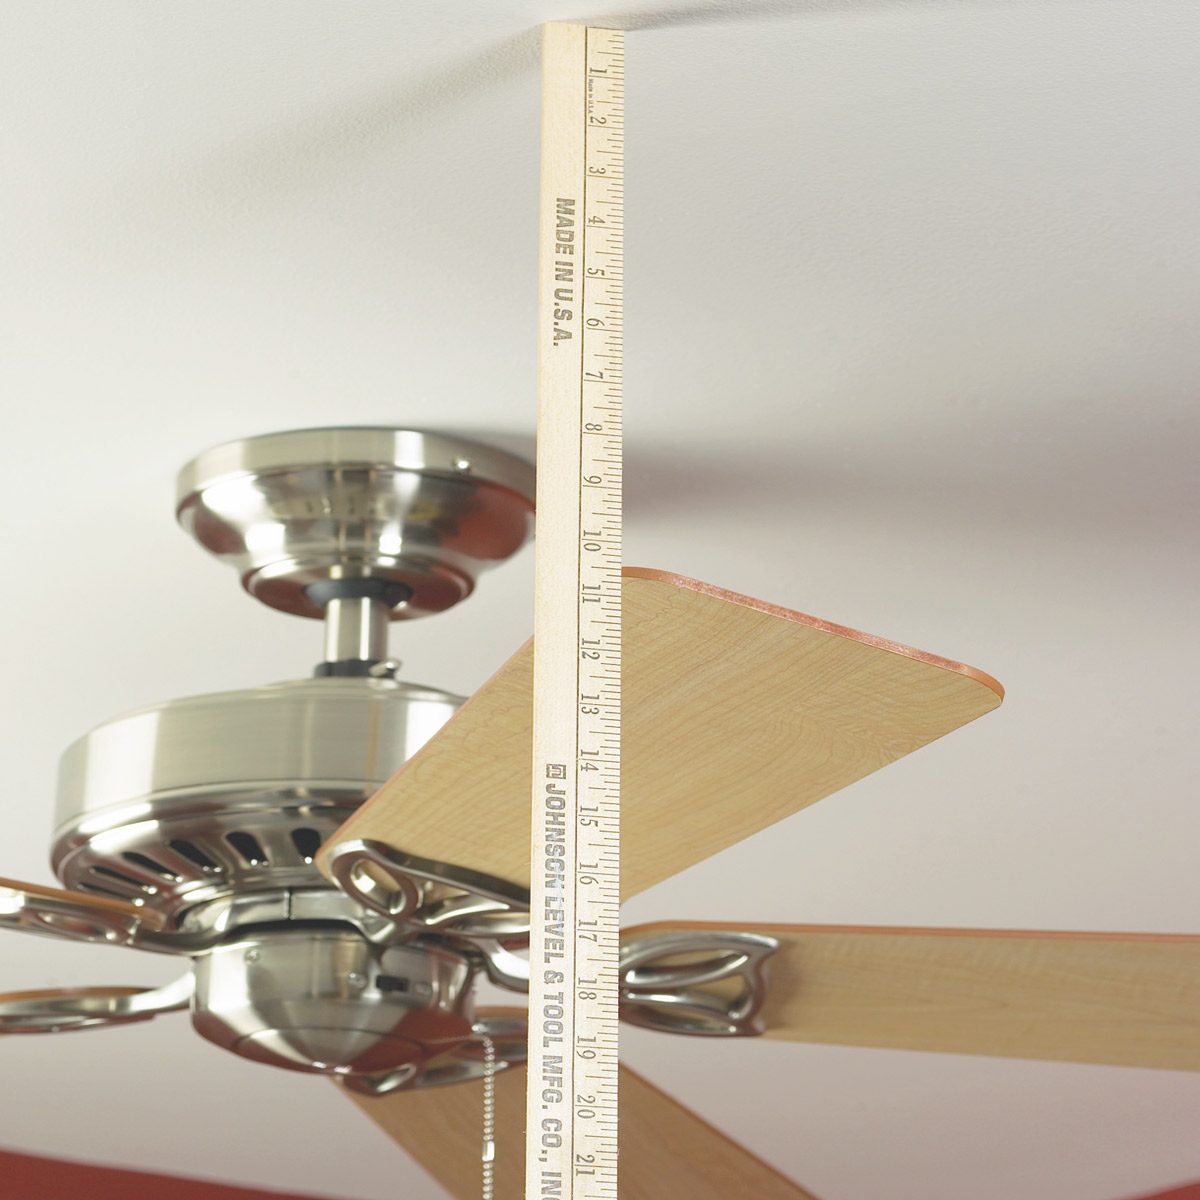 How to Balance a Wobbly Ceiling Fan